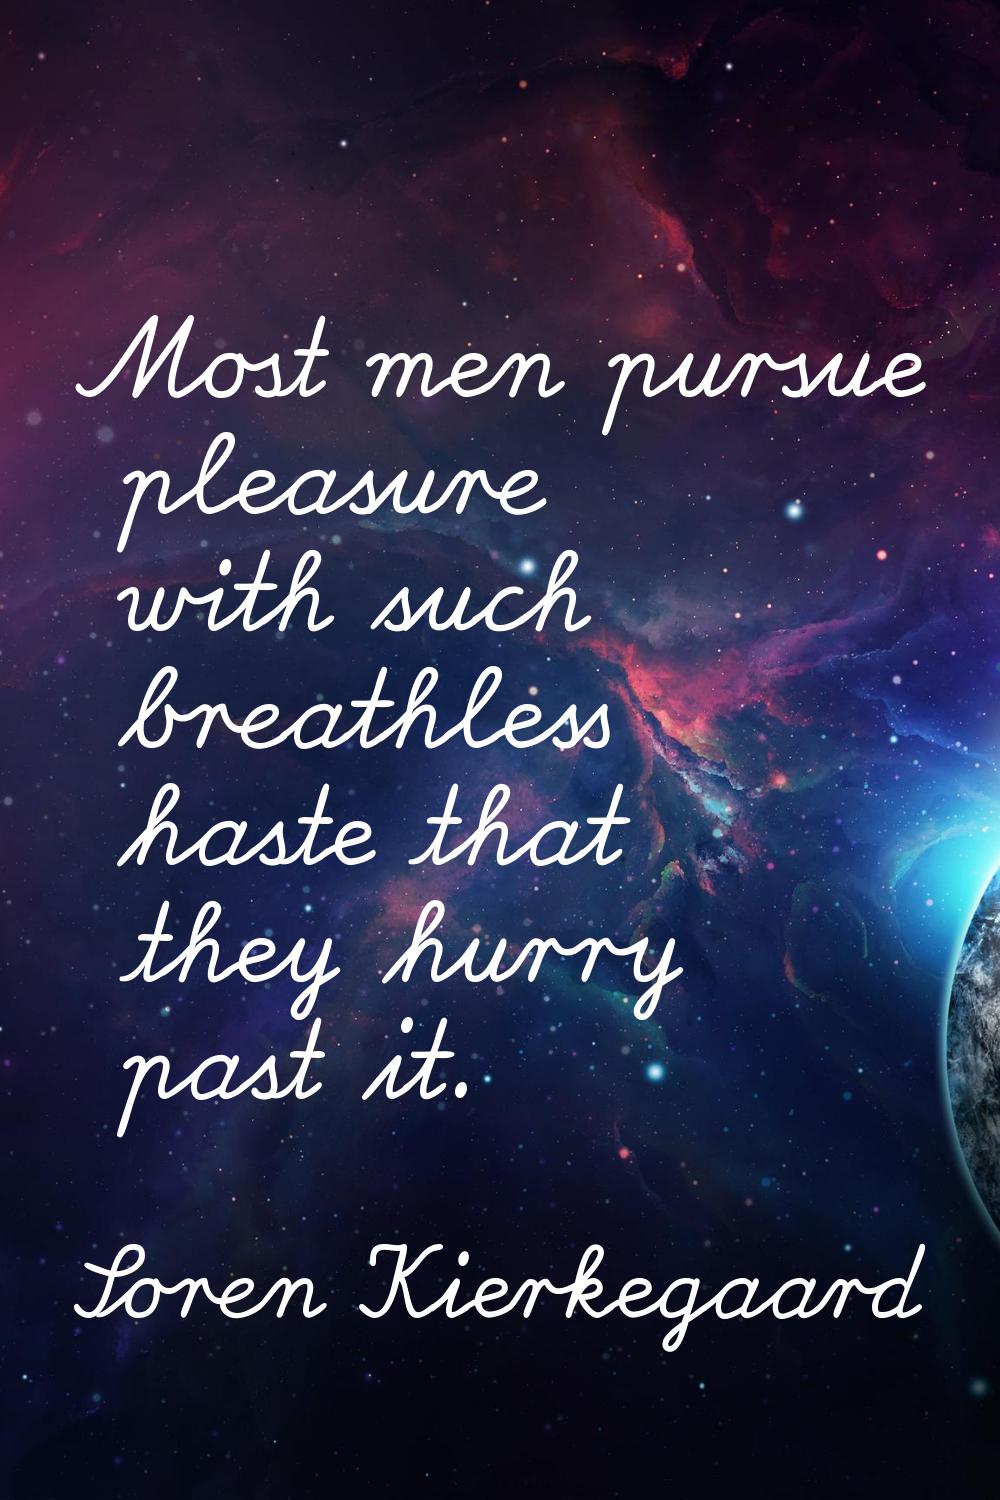 Most men pursue pleasure with such breathless haste that they hurry past it.